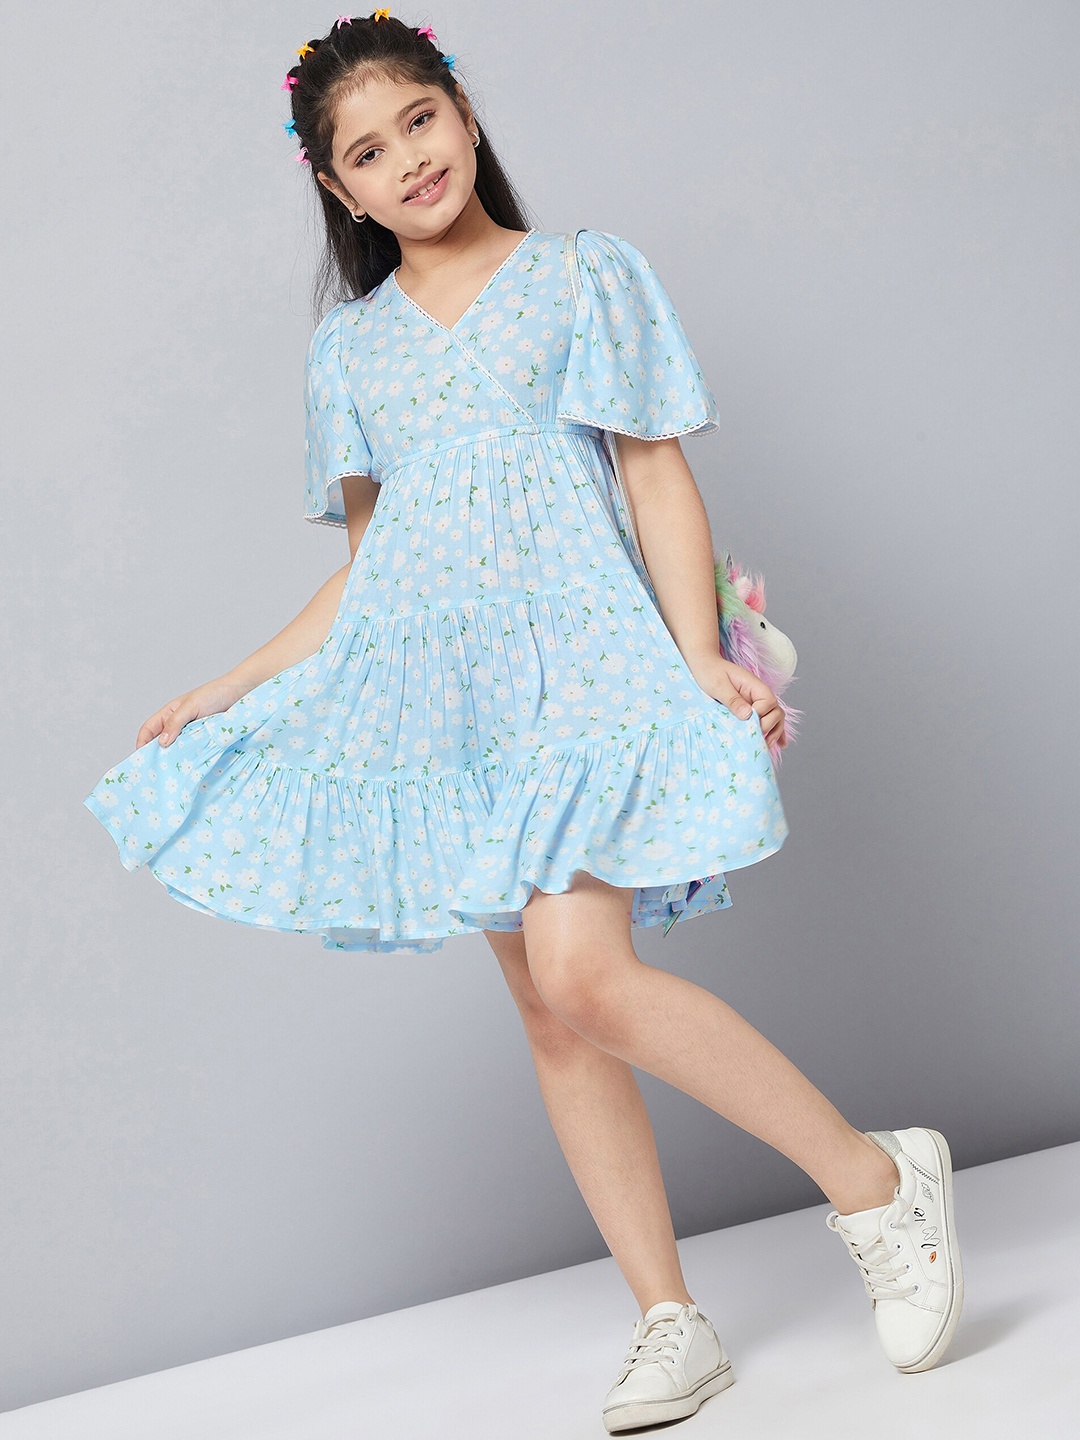 

Stylo Bug Girls Blue Floral Printed Cotton Empire Dress